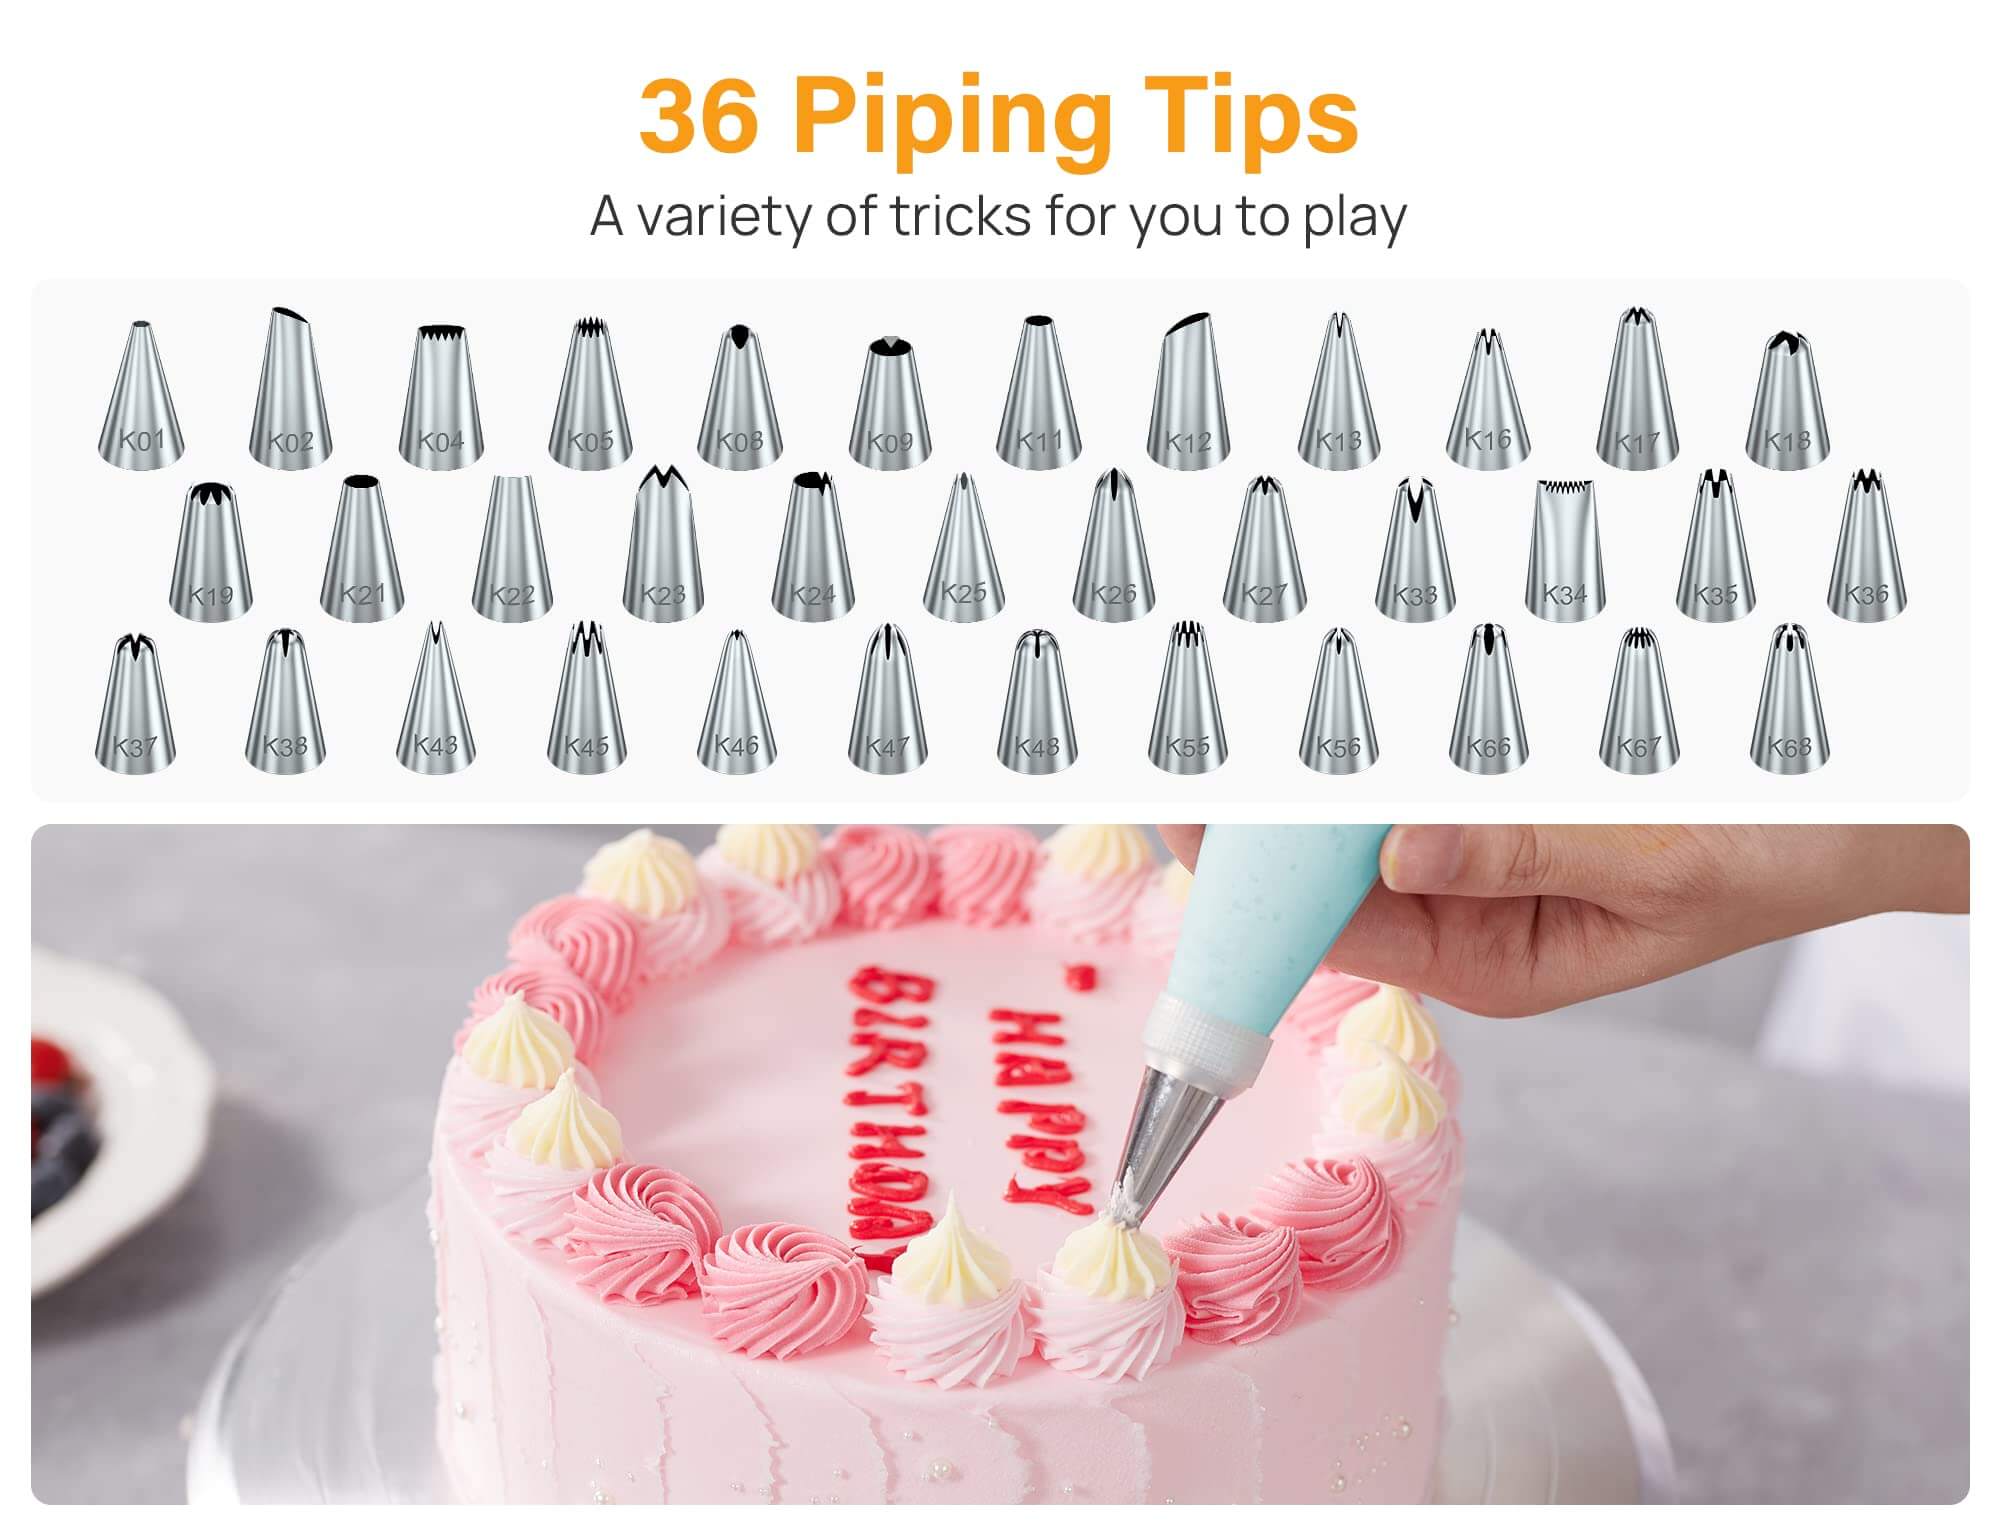 Kootek 42PCs Piping Bags and Tips Set, Cupcake Piping Tips Cake Decorating Kit with 36 Numbered Cake Frosting Icing Tips, 2 Silicone Pastry Bags, 2 Flower Nails, 2 Reusable Couplers for Baking